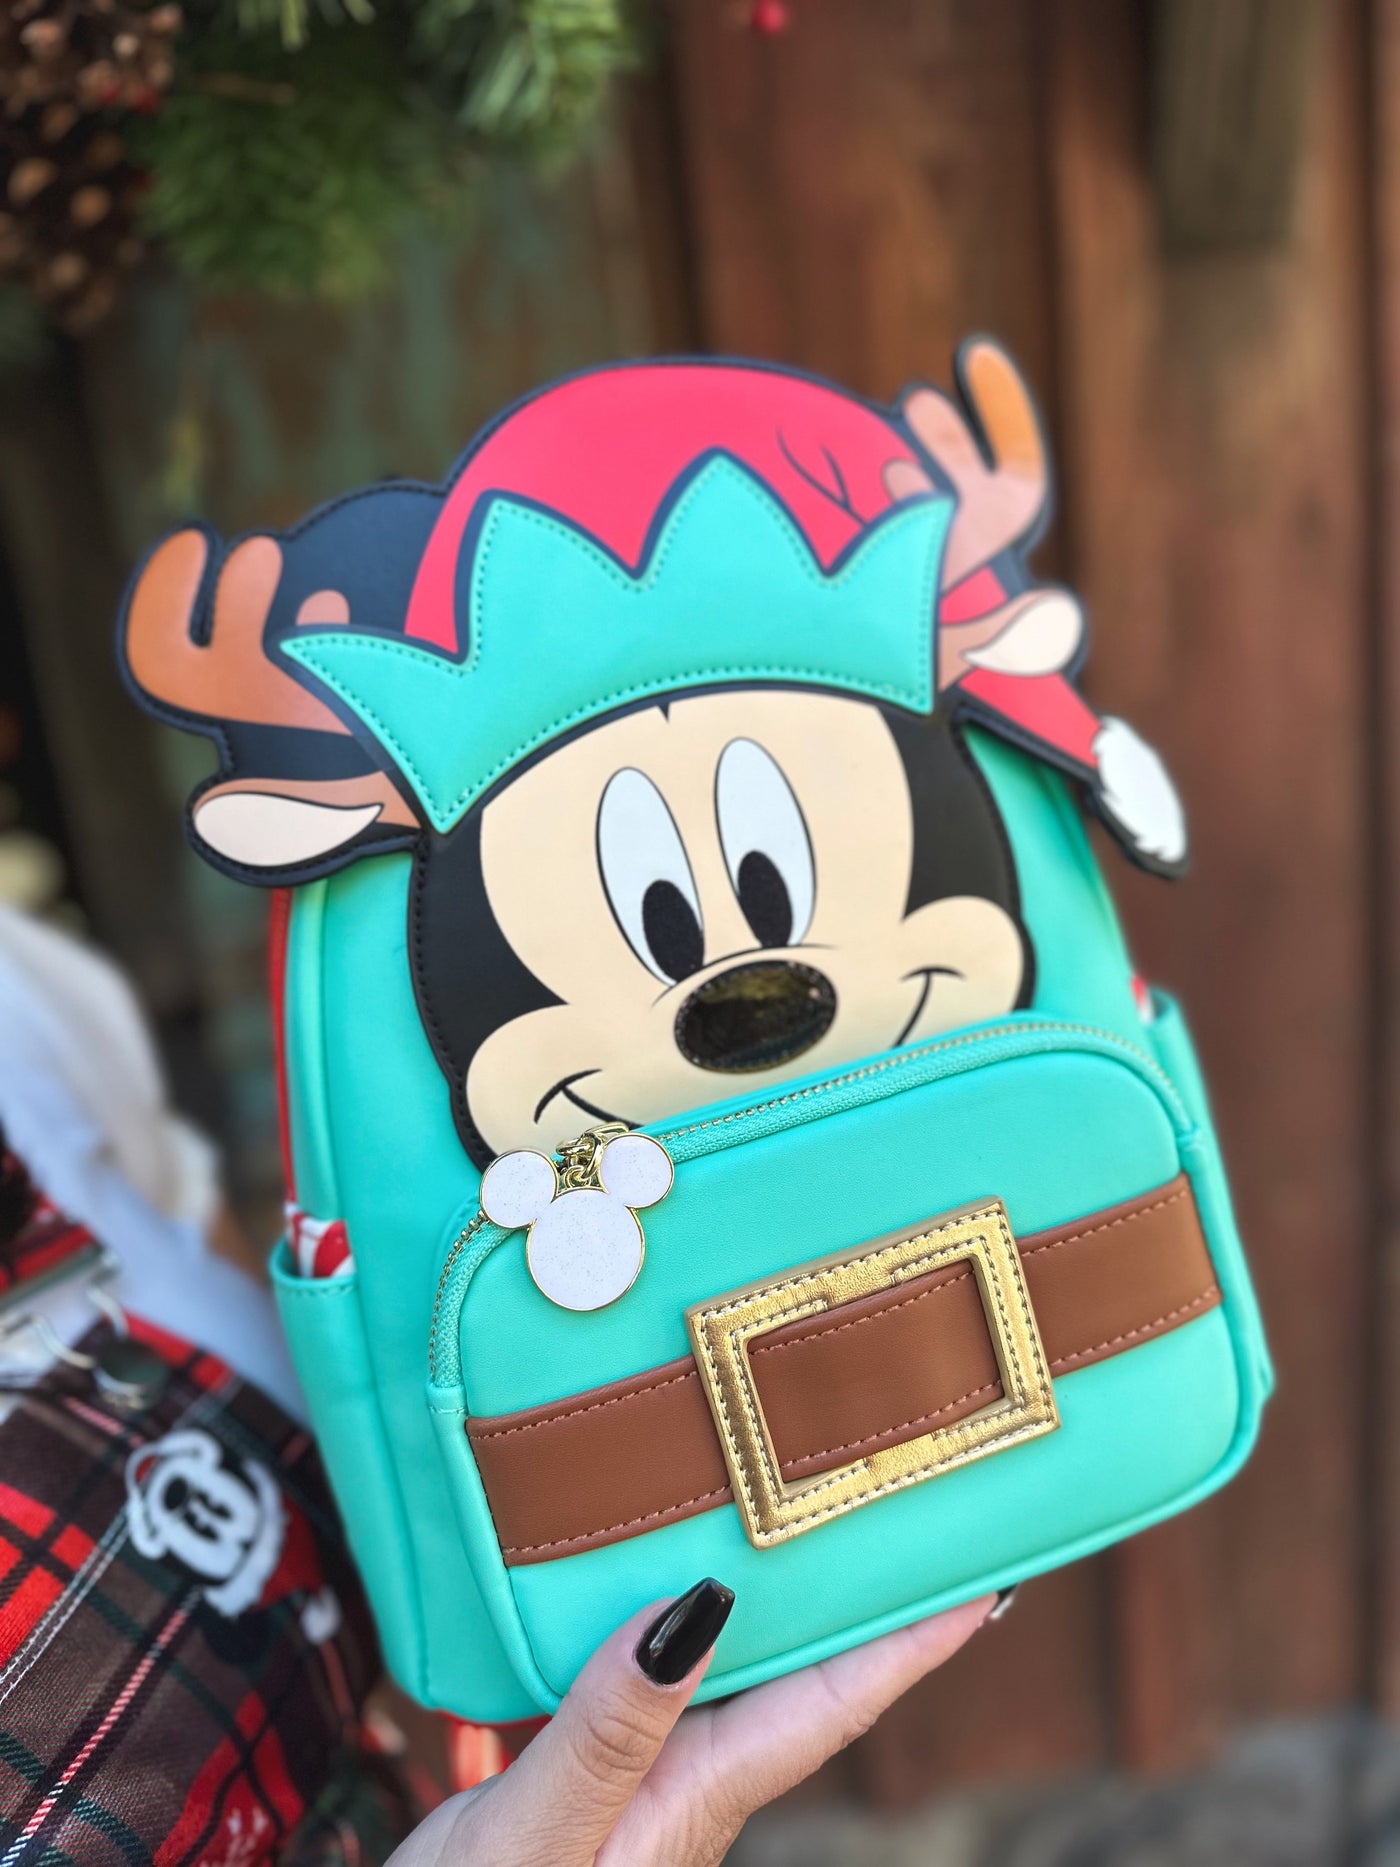 707 Street Exclusive - Loungefly Disney Light Up Mickey Mouse Reindeer Cosplay Mini Backpack - Loungefly mini backpack lifestyle image 01